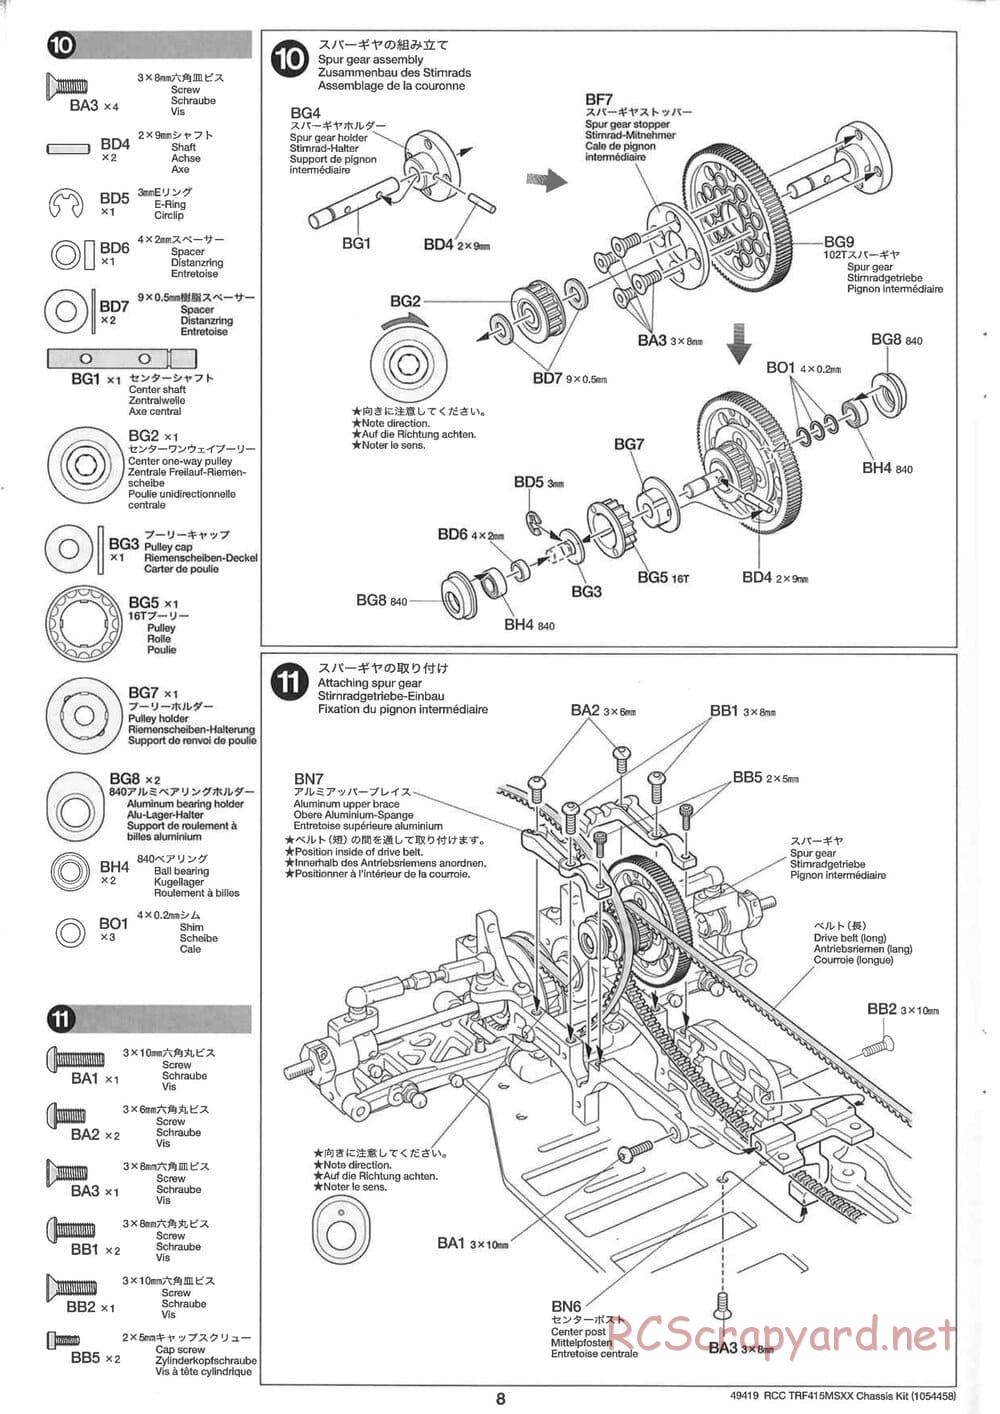 Tamiya - TRF415-MSXX Chassis - Manual - Page 8